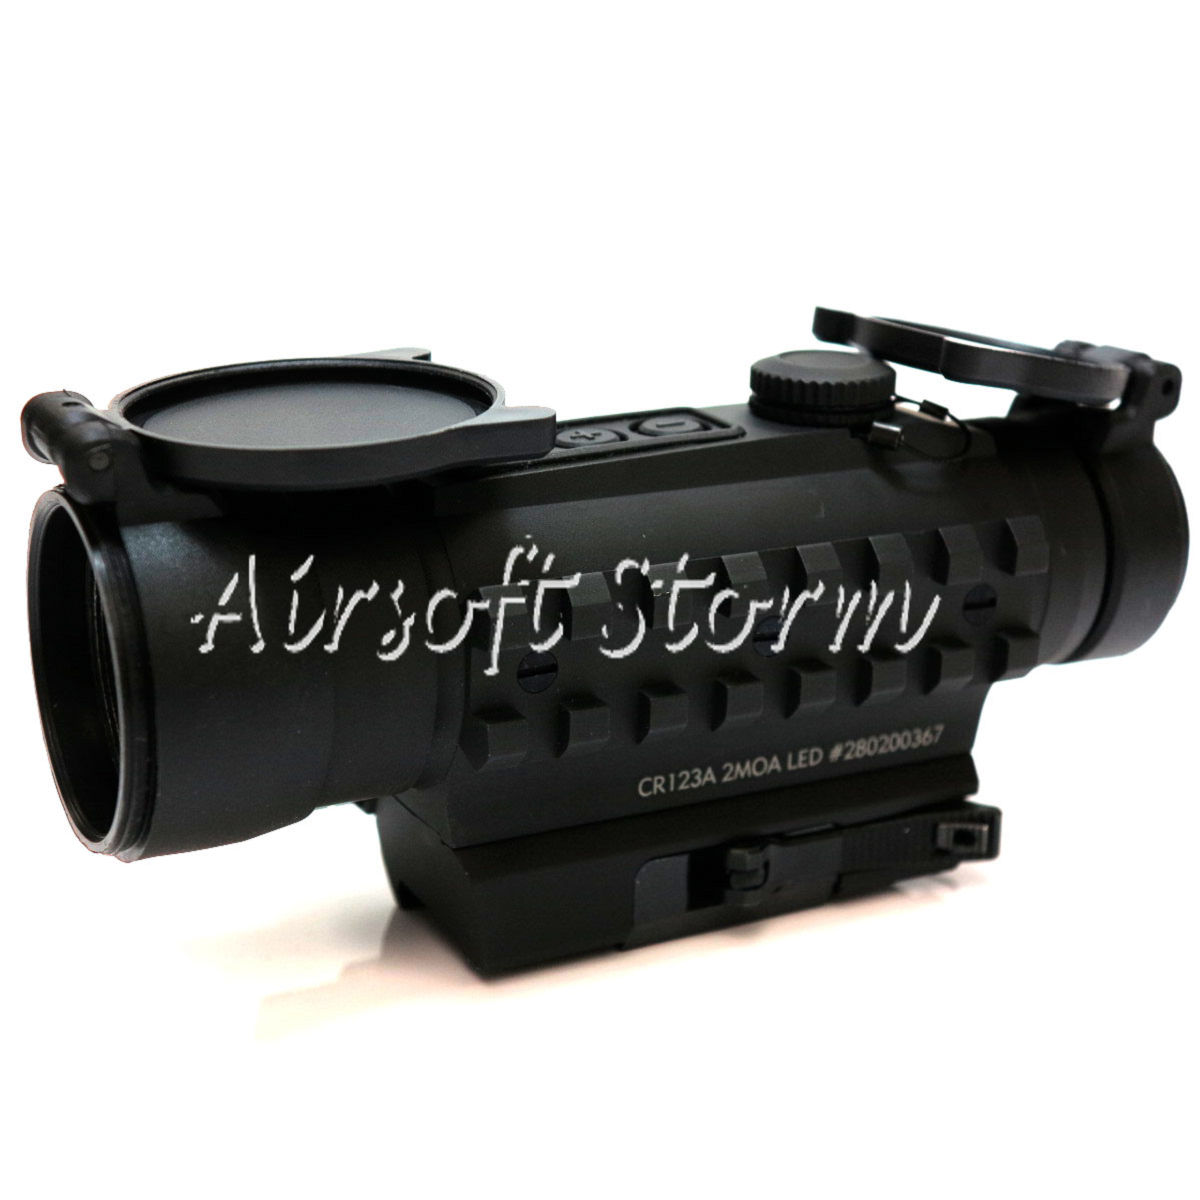 SWAT Gear Tactical Holosun HS400AGA 1x30 Red Dot Sight Scope with Green Laser (2 MOA) - Click Image to Close